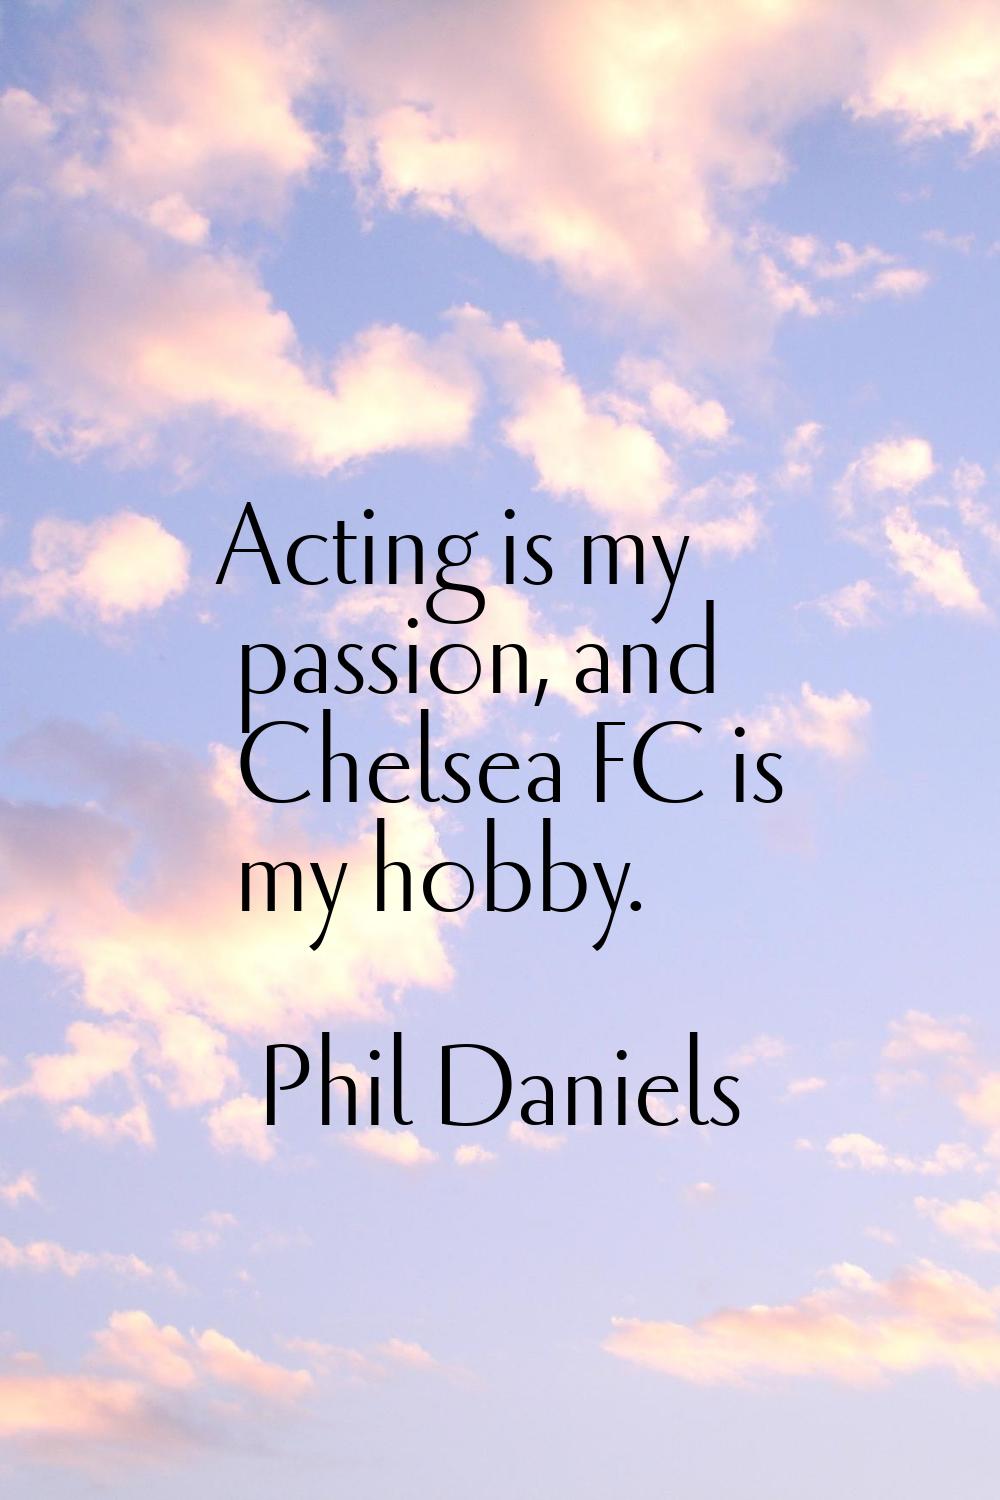 Acting is my passion, and Chelsea FC is my hobby.